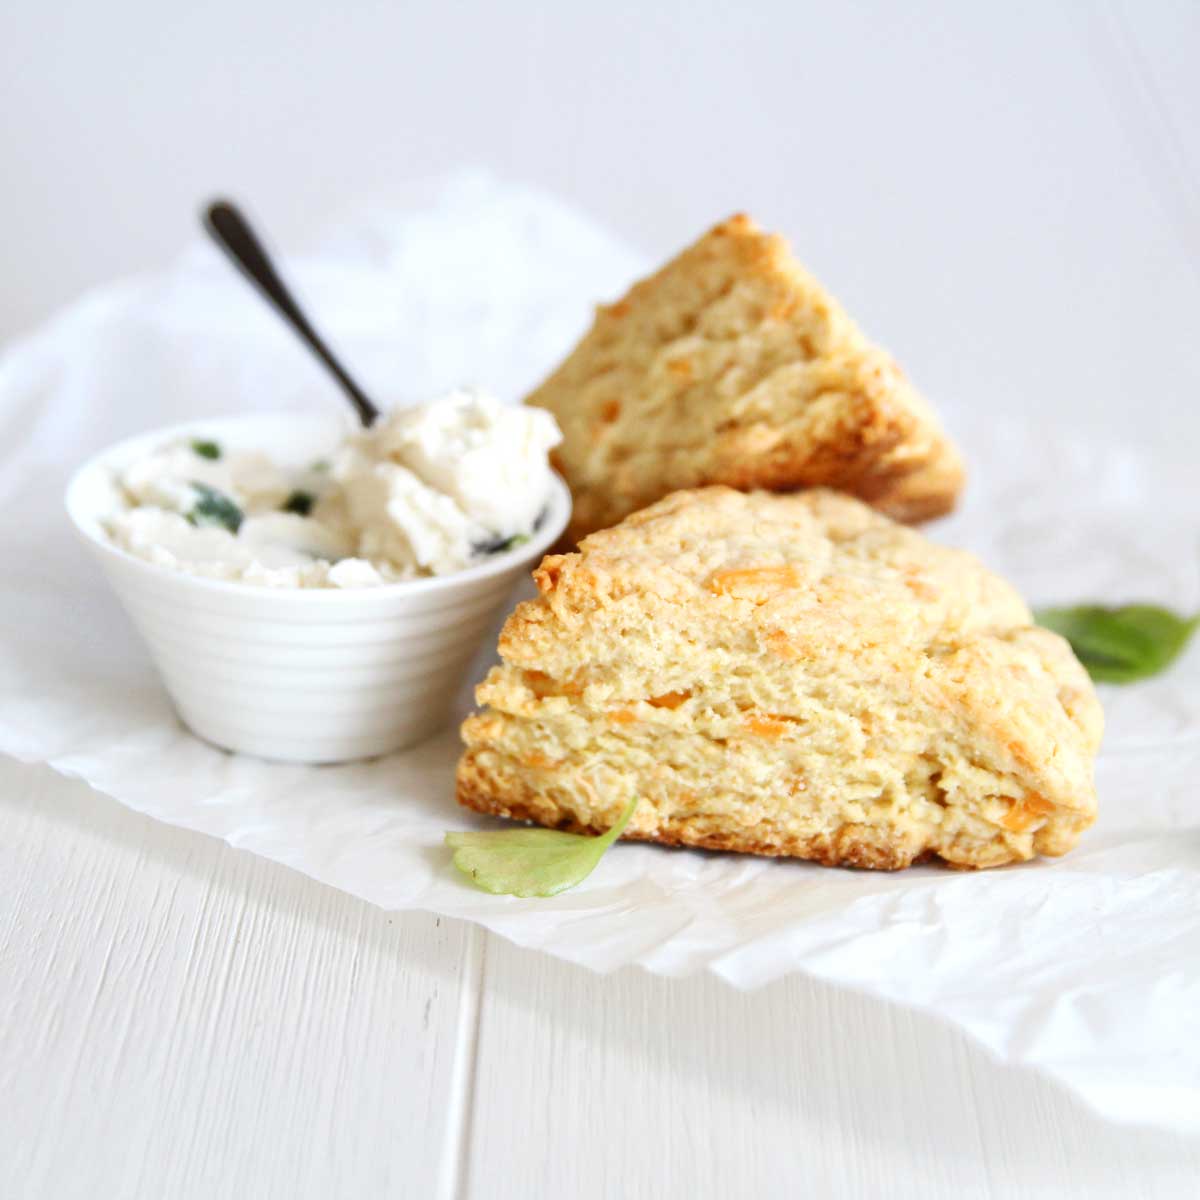 The Best Ever Vegan "Cheddar Cheese" Scones - Homemade Chickpea Scones